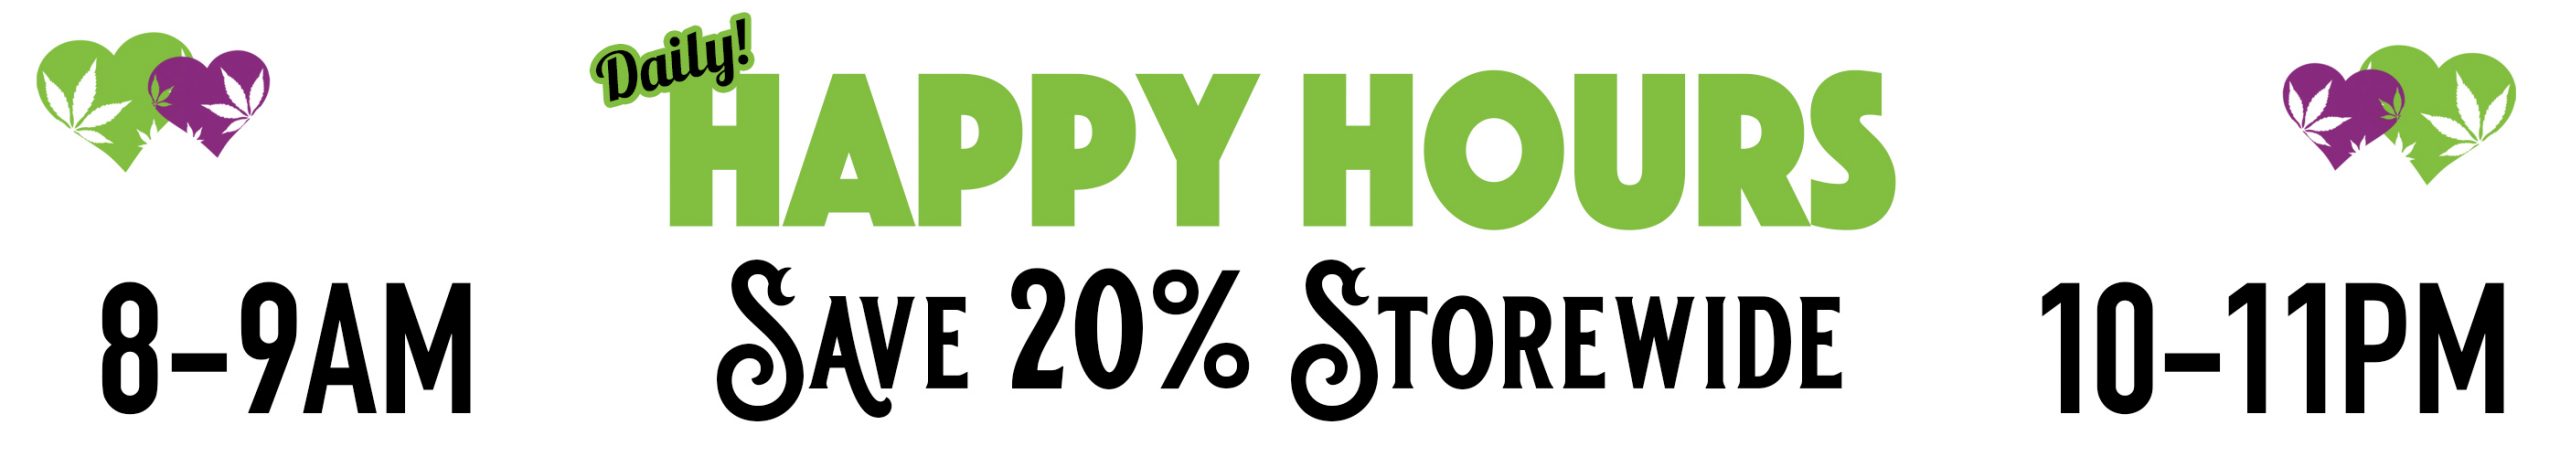 Happy Hours SAVE 20% 8-9am 10-11pm